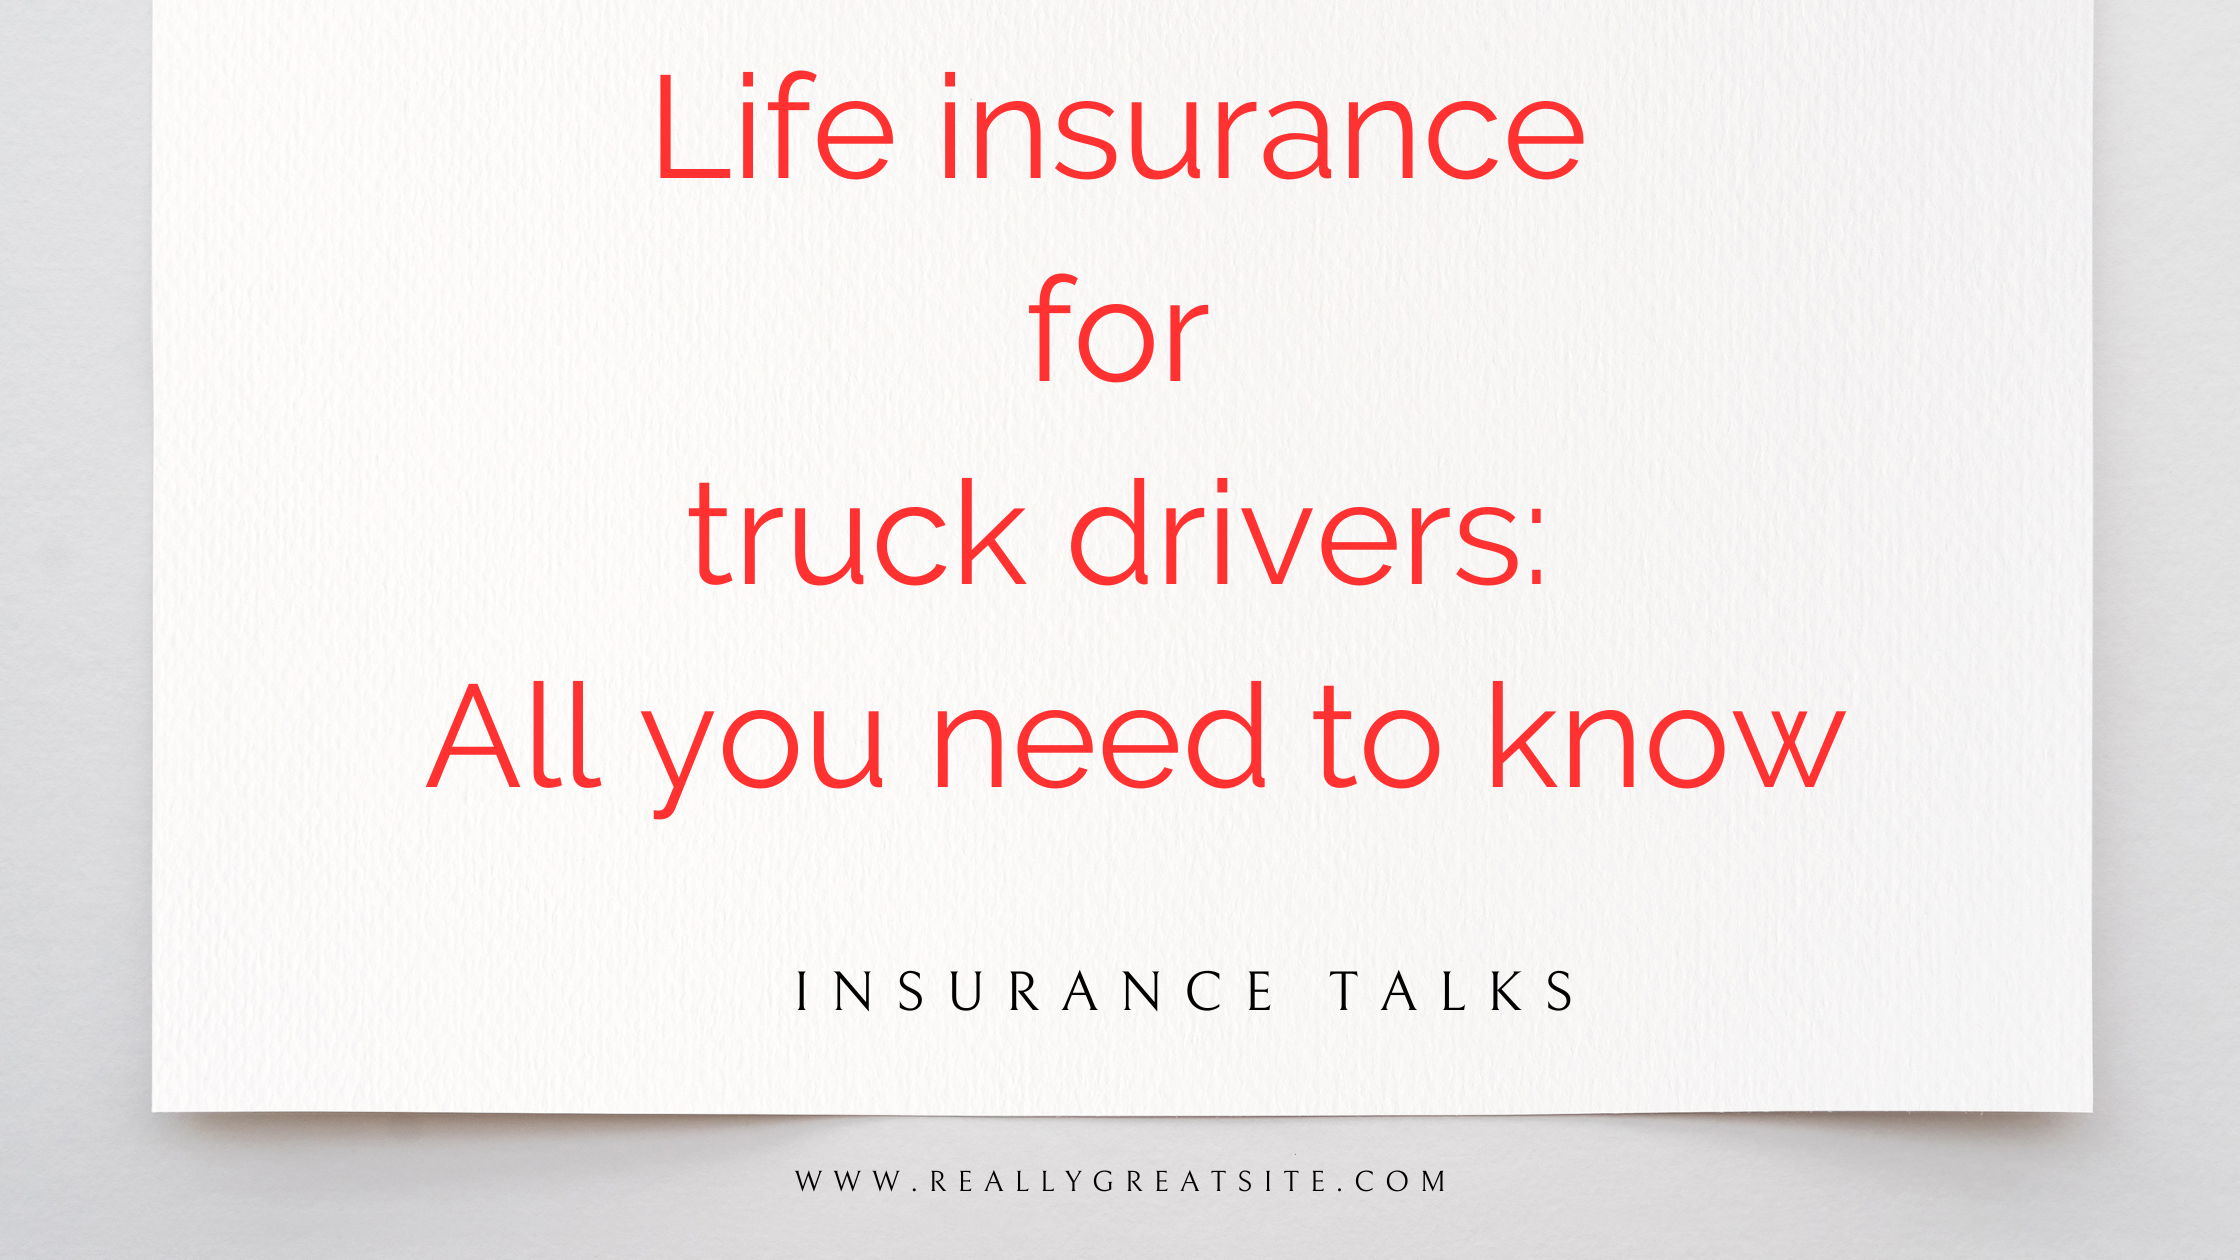 Life insurance for truck drivers: All you need to know